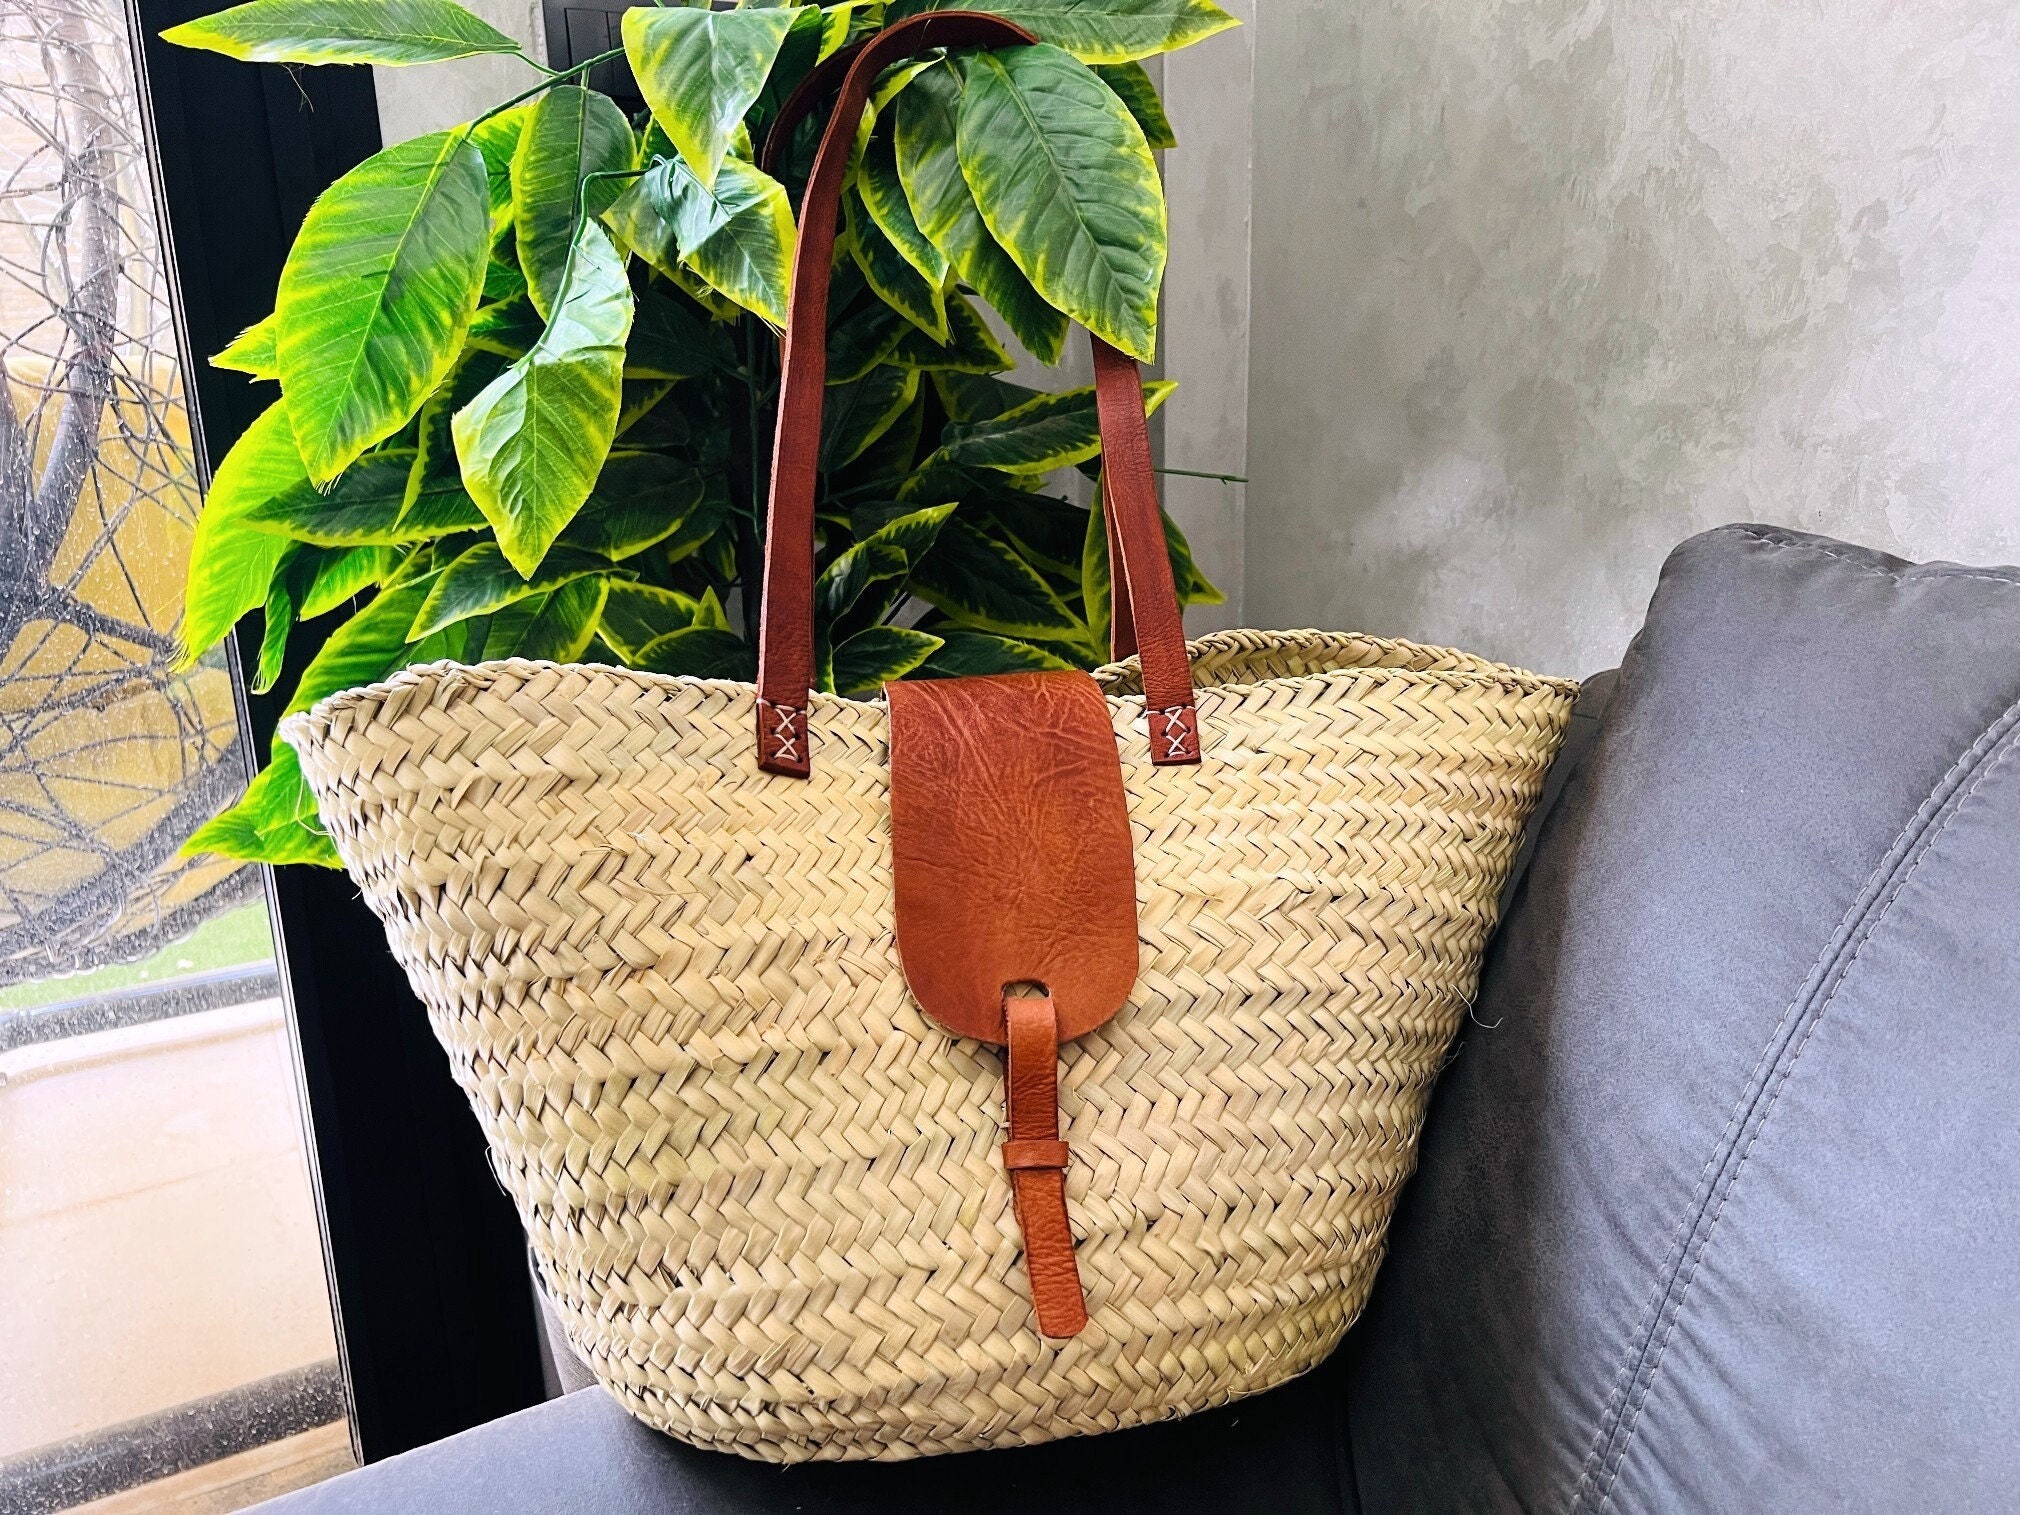 Straw Bag Natural French Basket Handle Leather